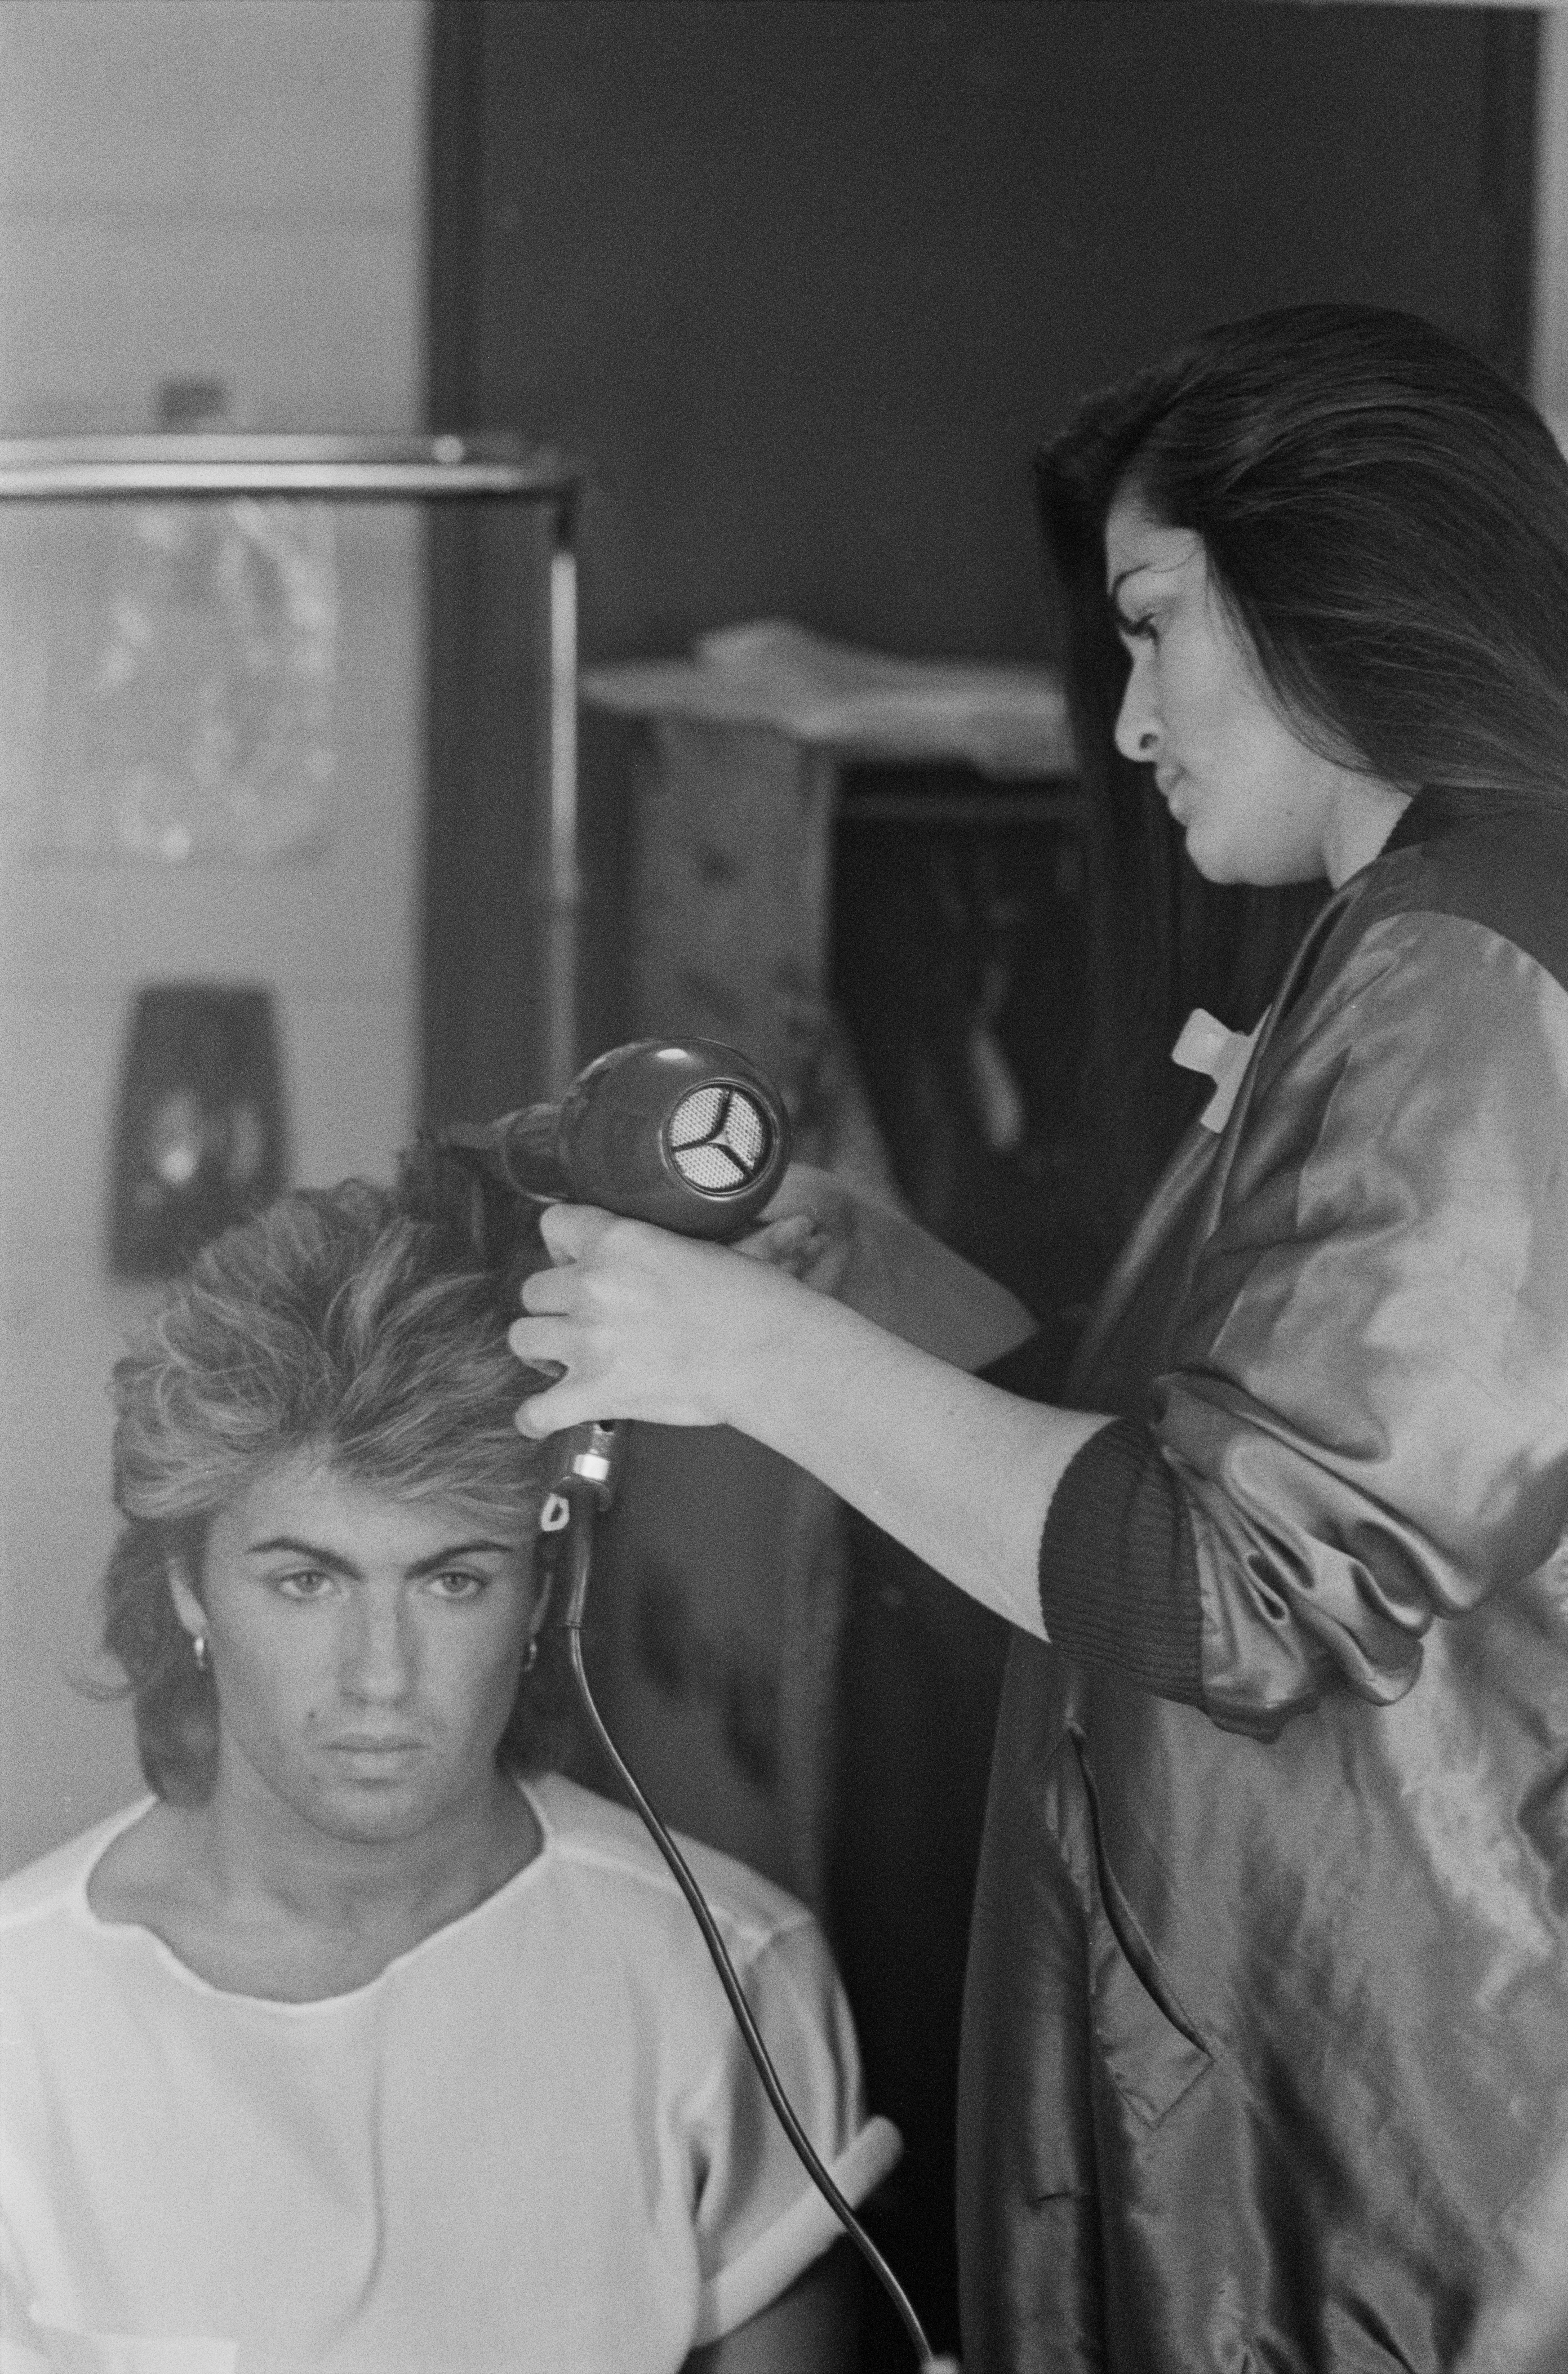 George Michael pictured having his hair done by a stylist backstage on January 1, 1985 in Australia | Source: Getty Images